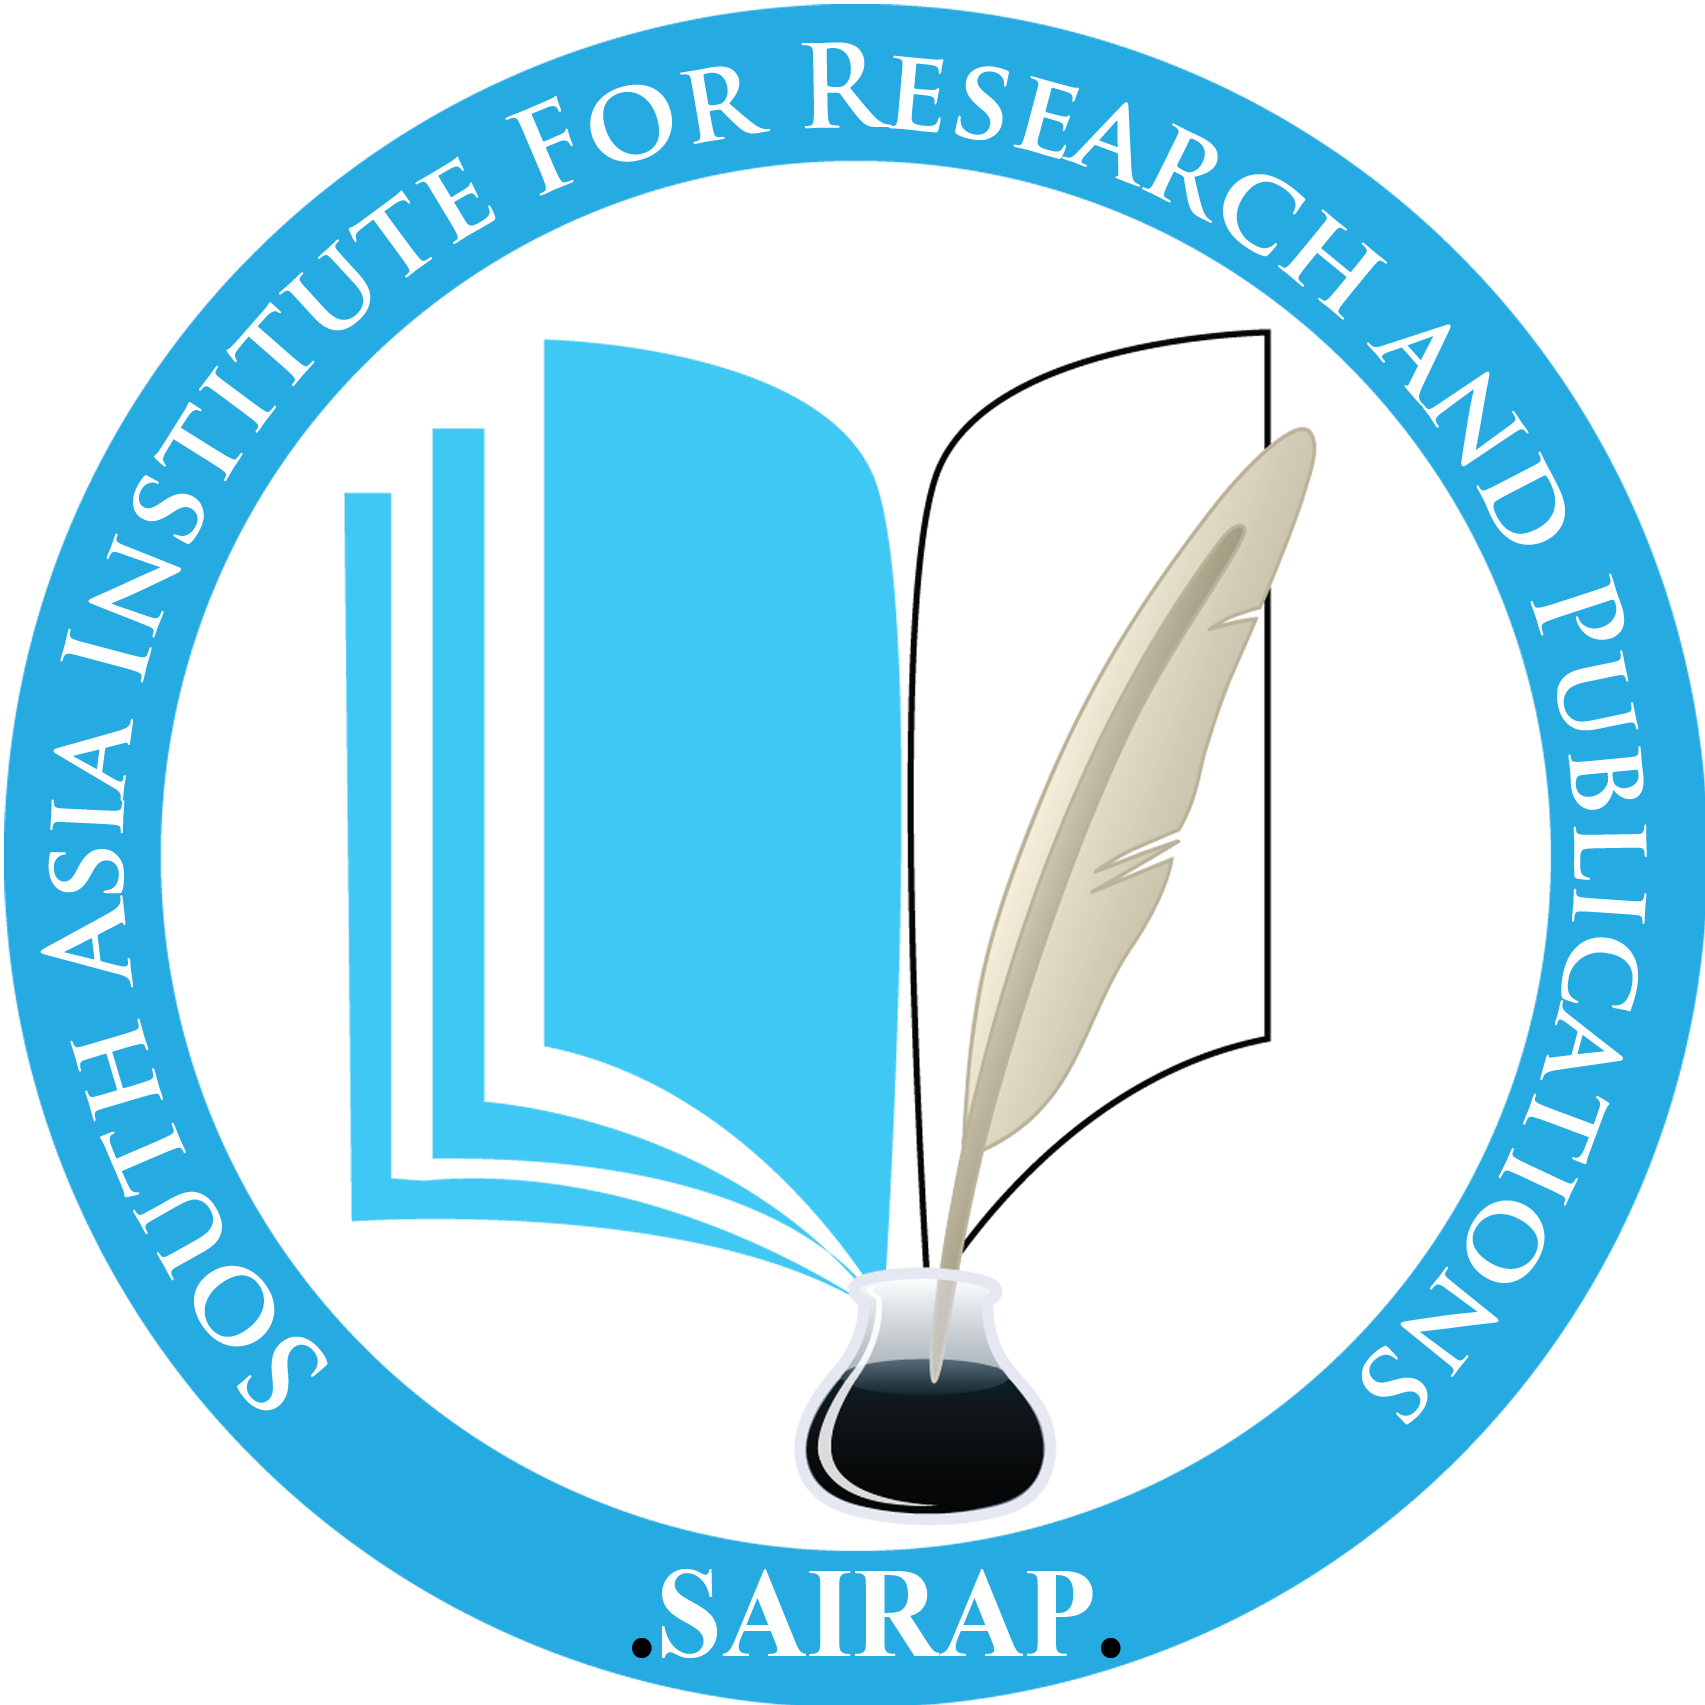 South Asia Institute For Research and Publications